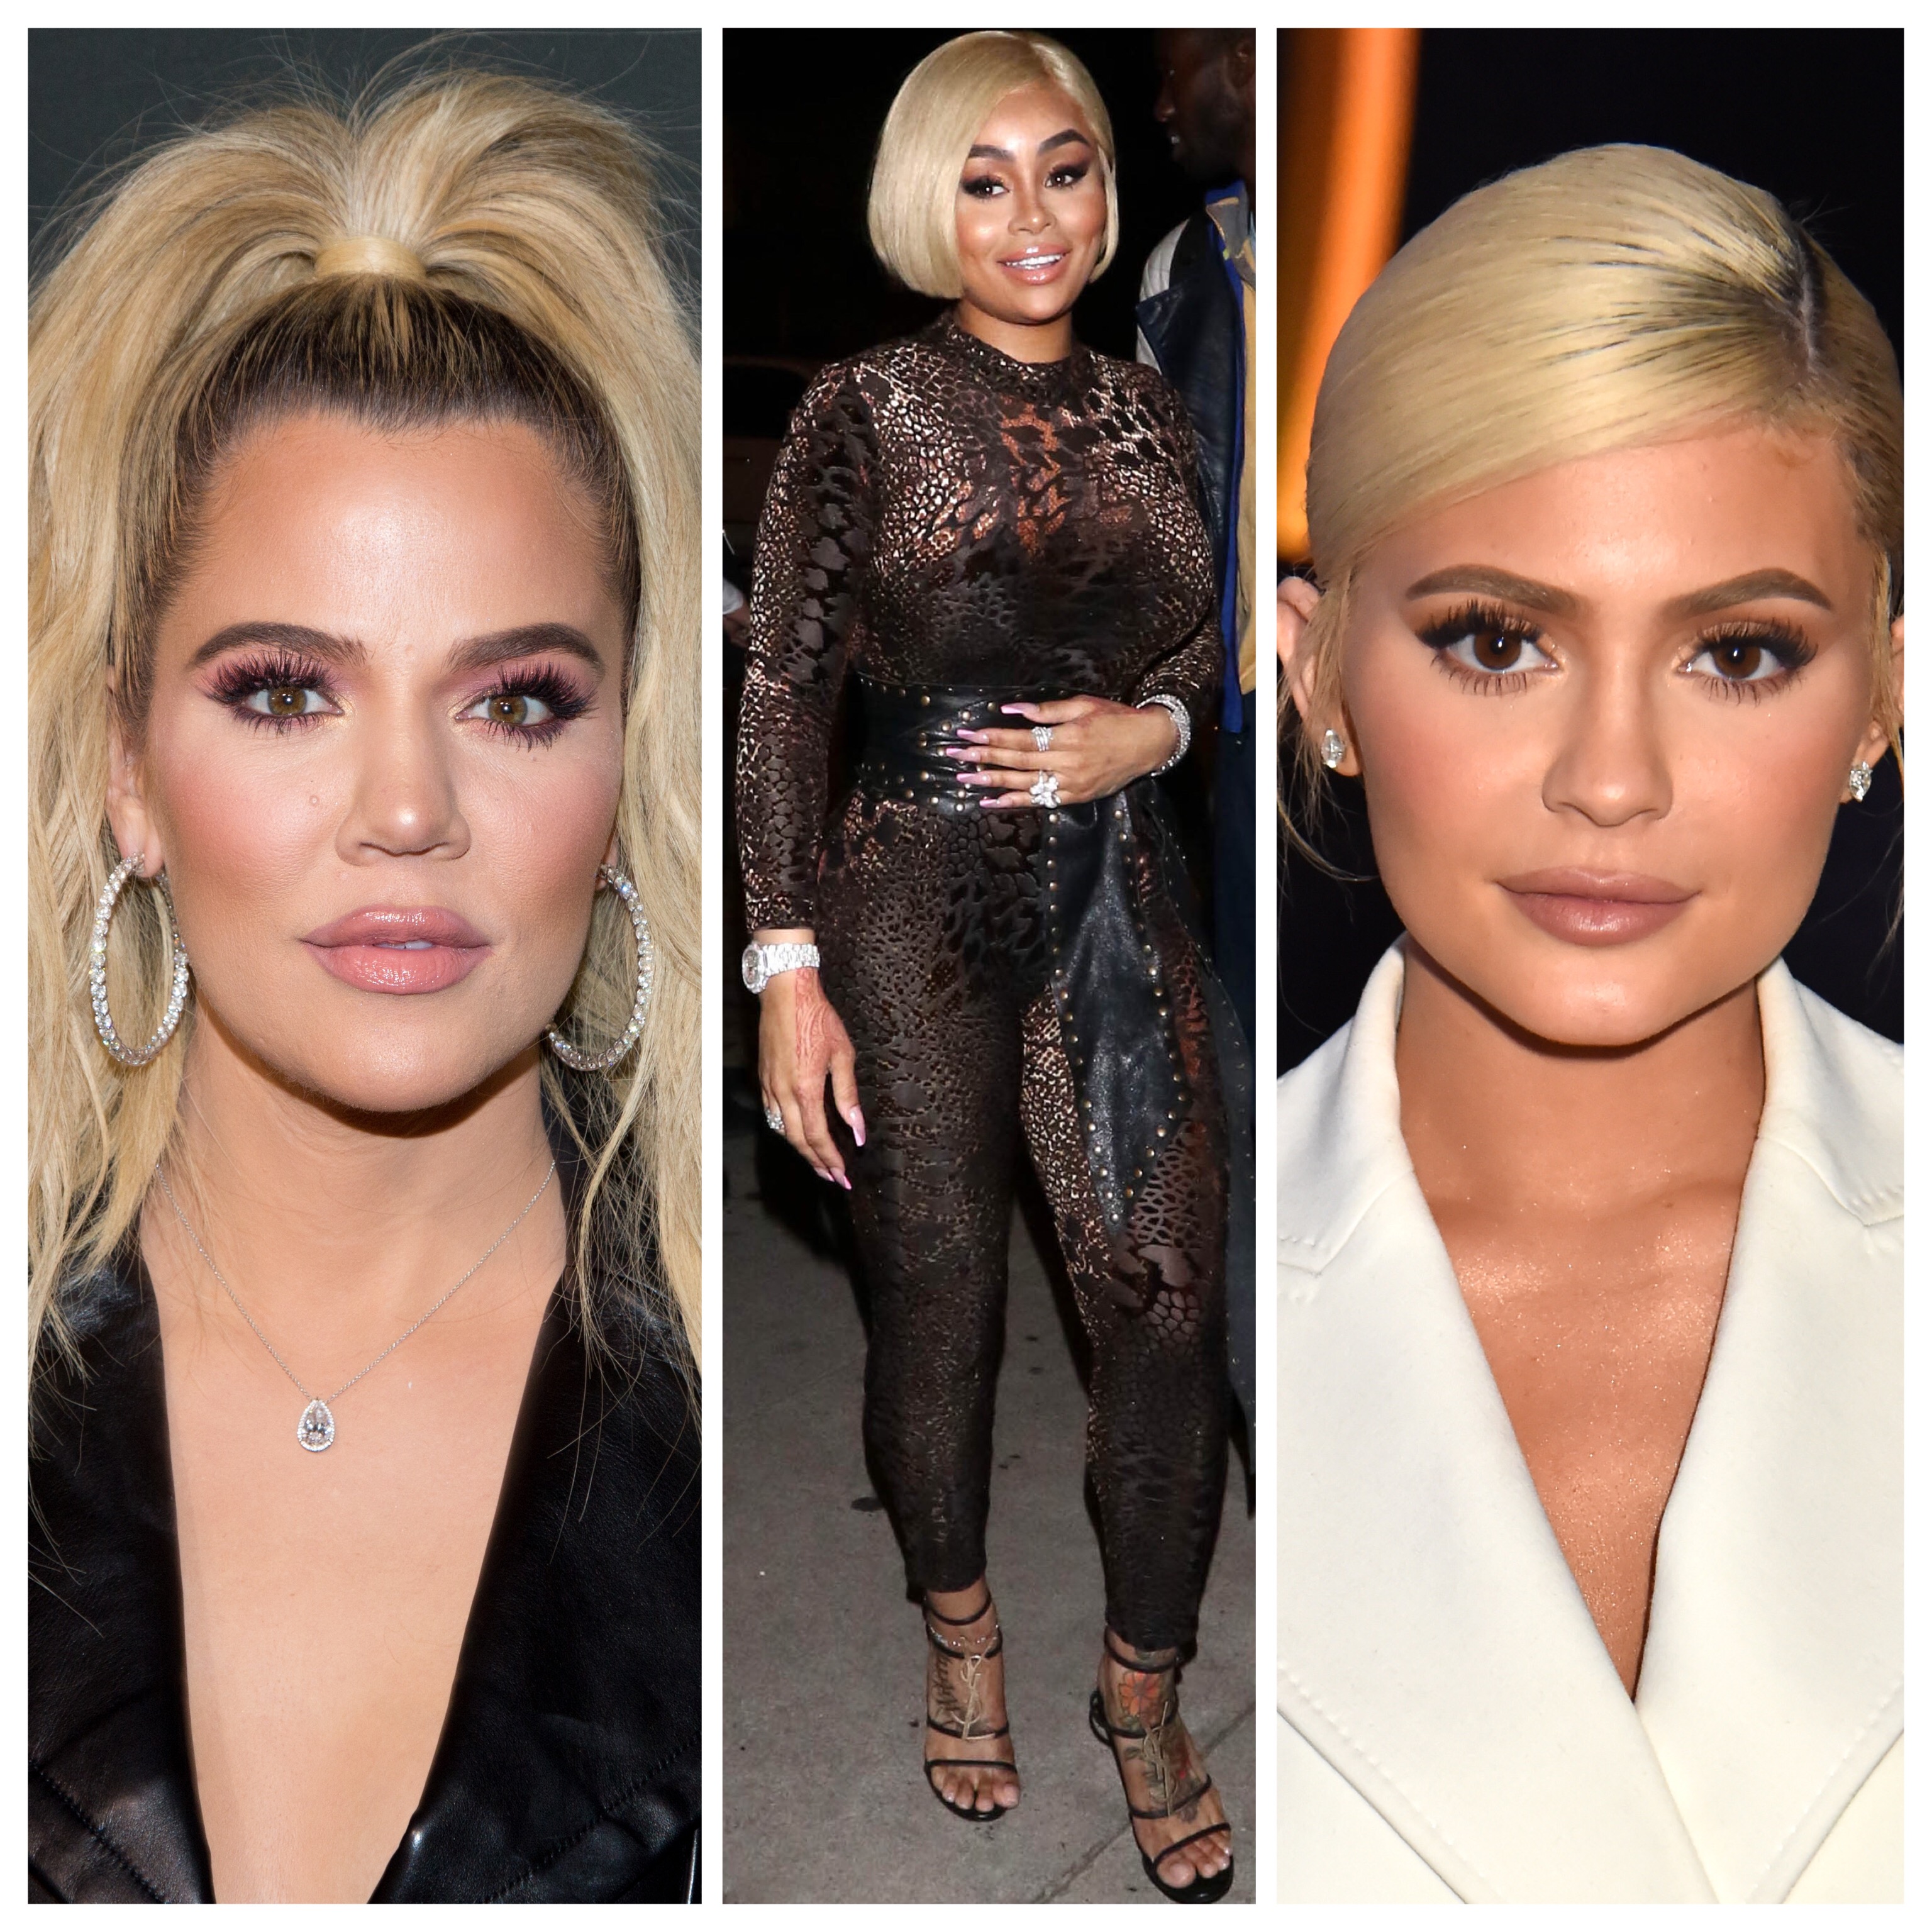 Leaked Emails Show Kylie Jenner And Khloe Kardashian Talked Smack About Blac Chyna ...